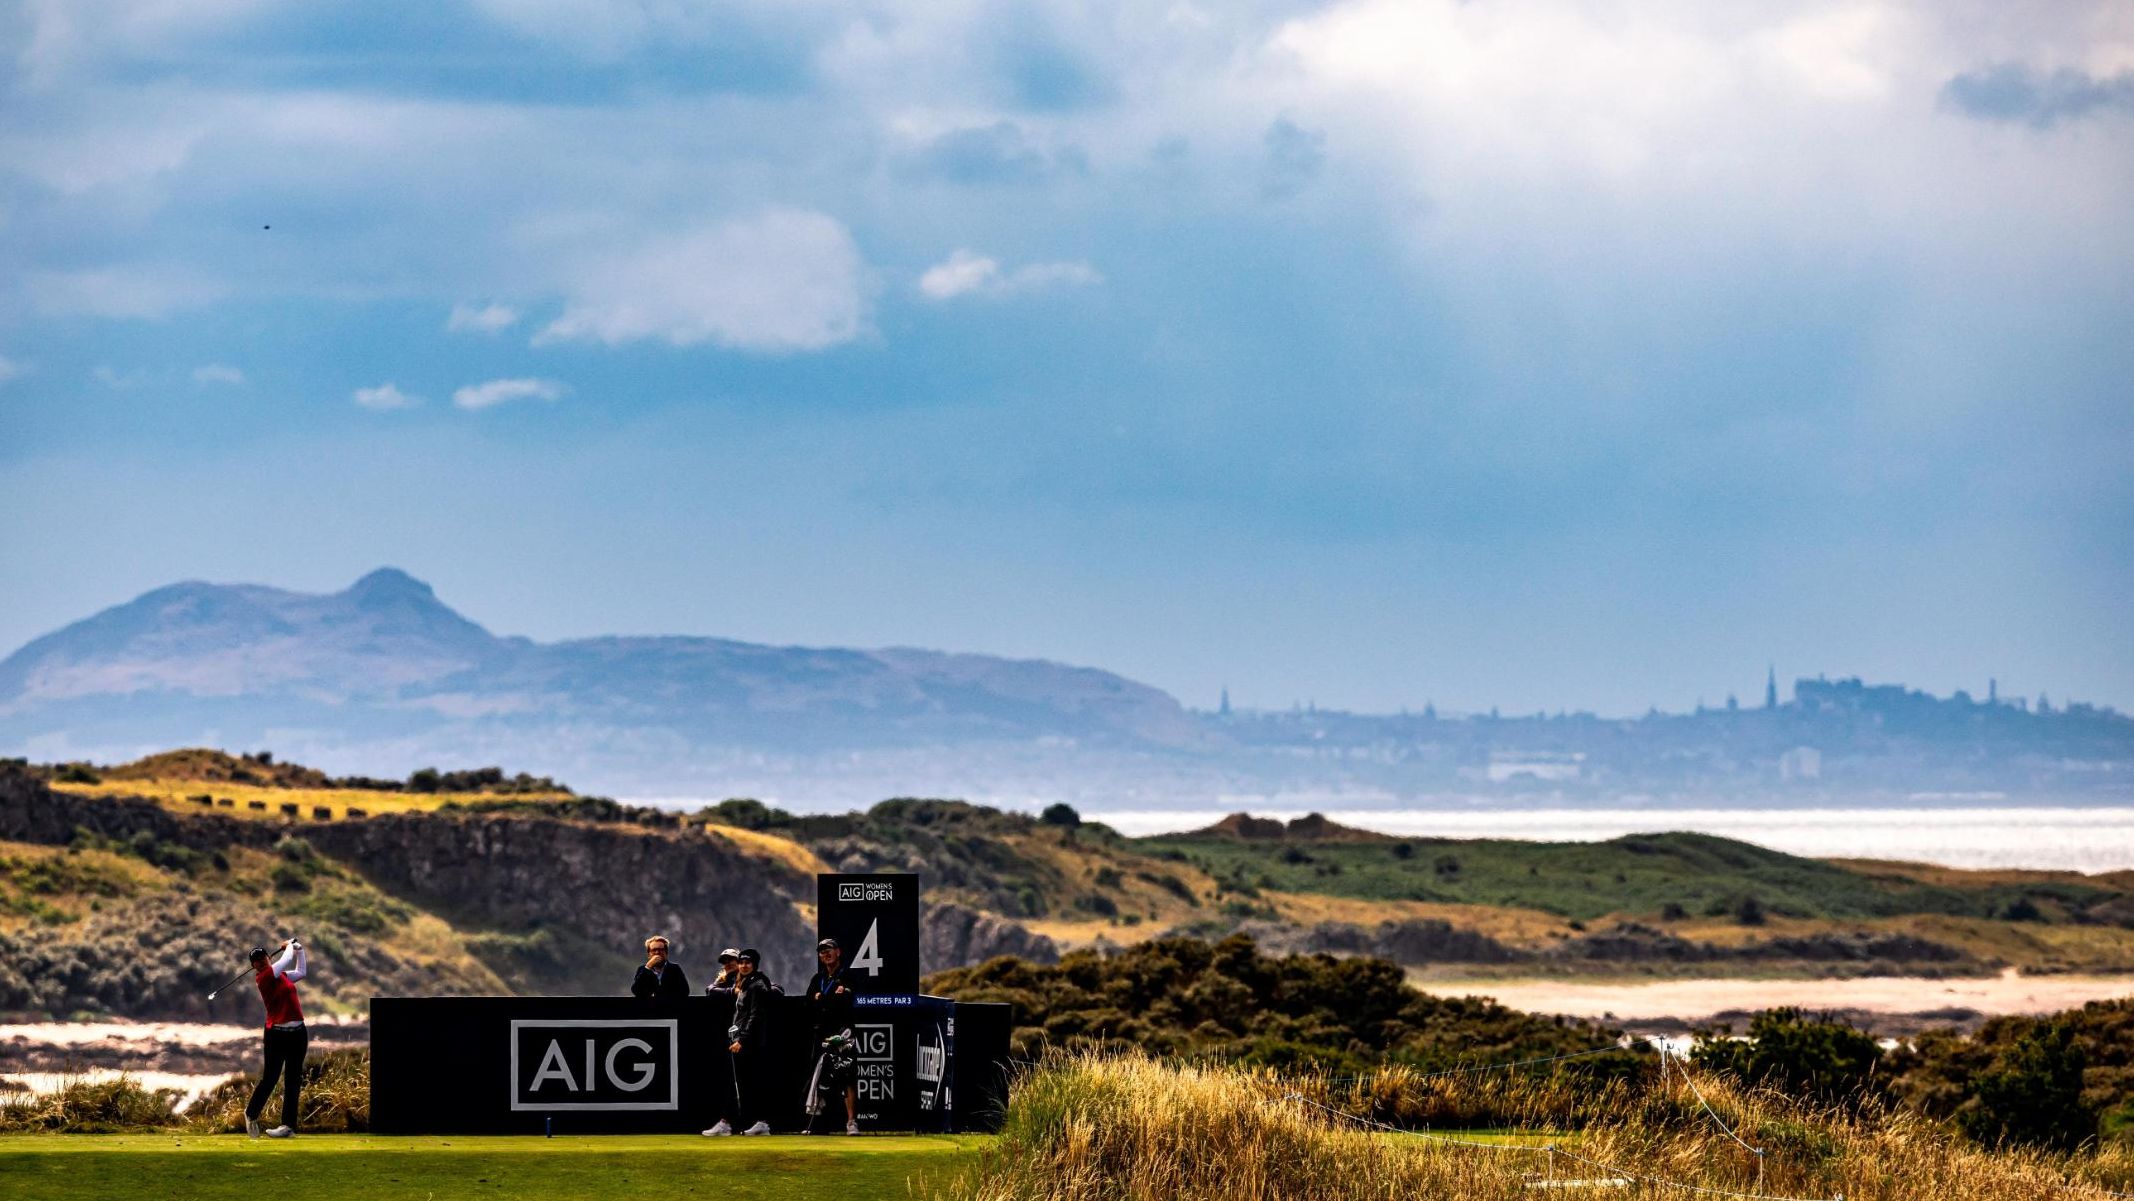 General view of the Muirfield golf course on the 4th tee box prior to the 2022 AIG Women's Open in Gullane, Scotland.